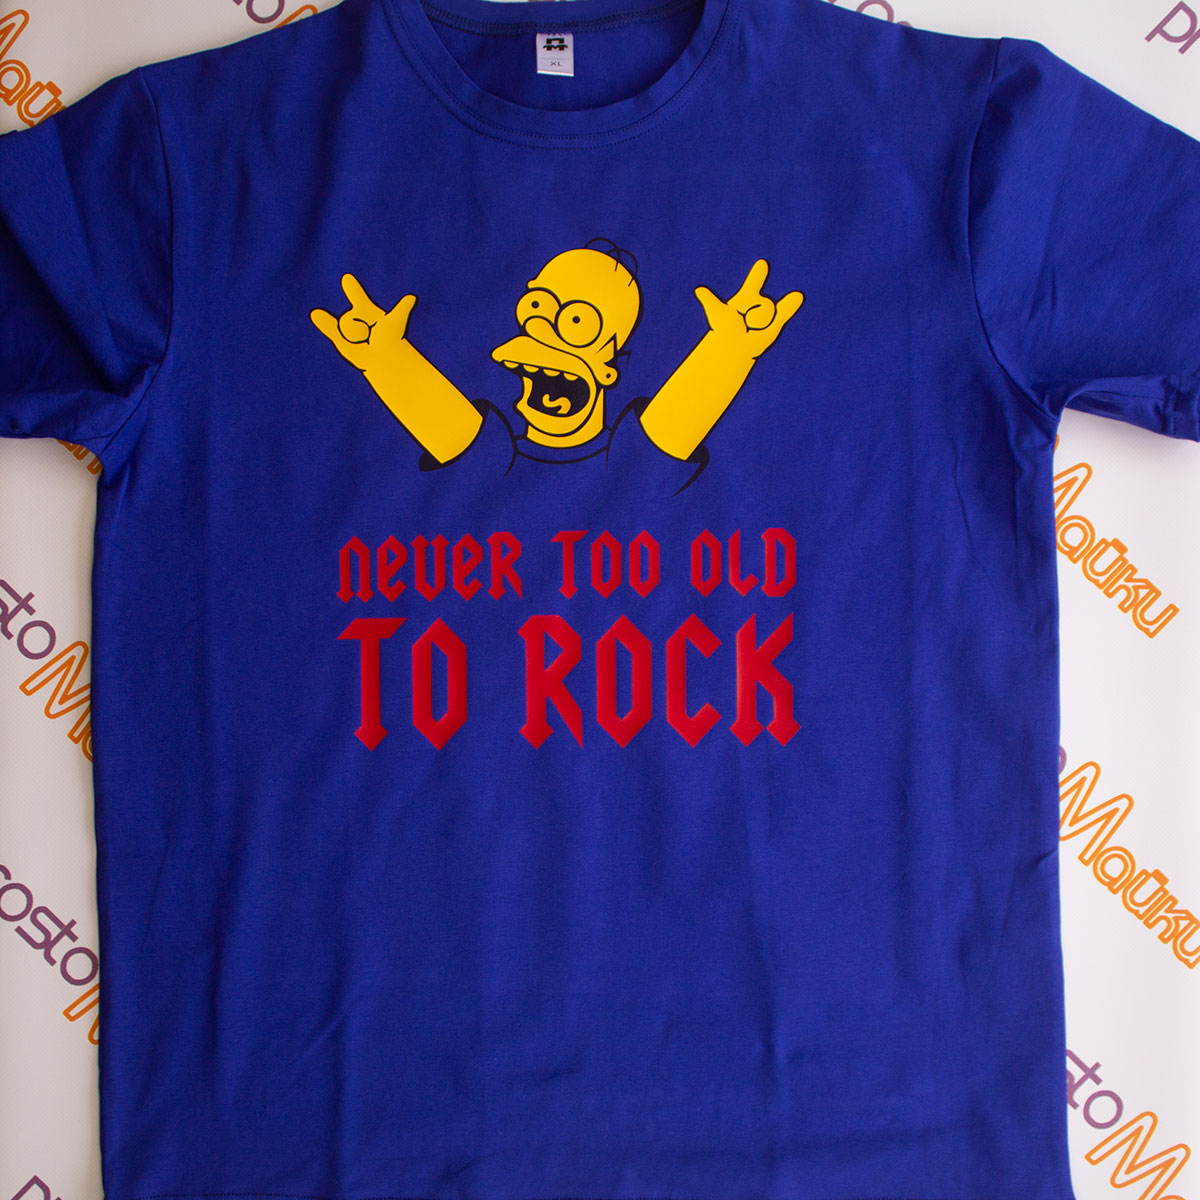 Футболка Never too old to rock!